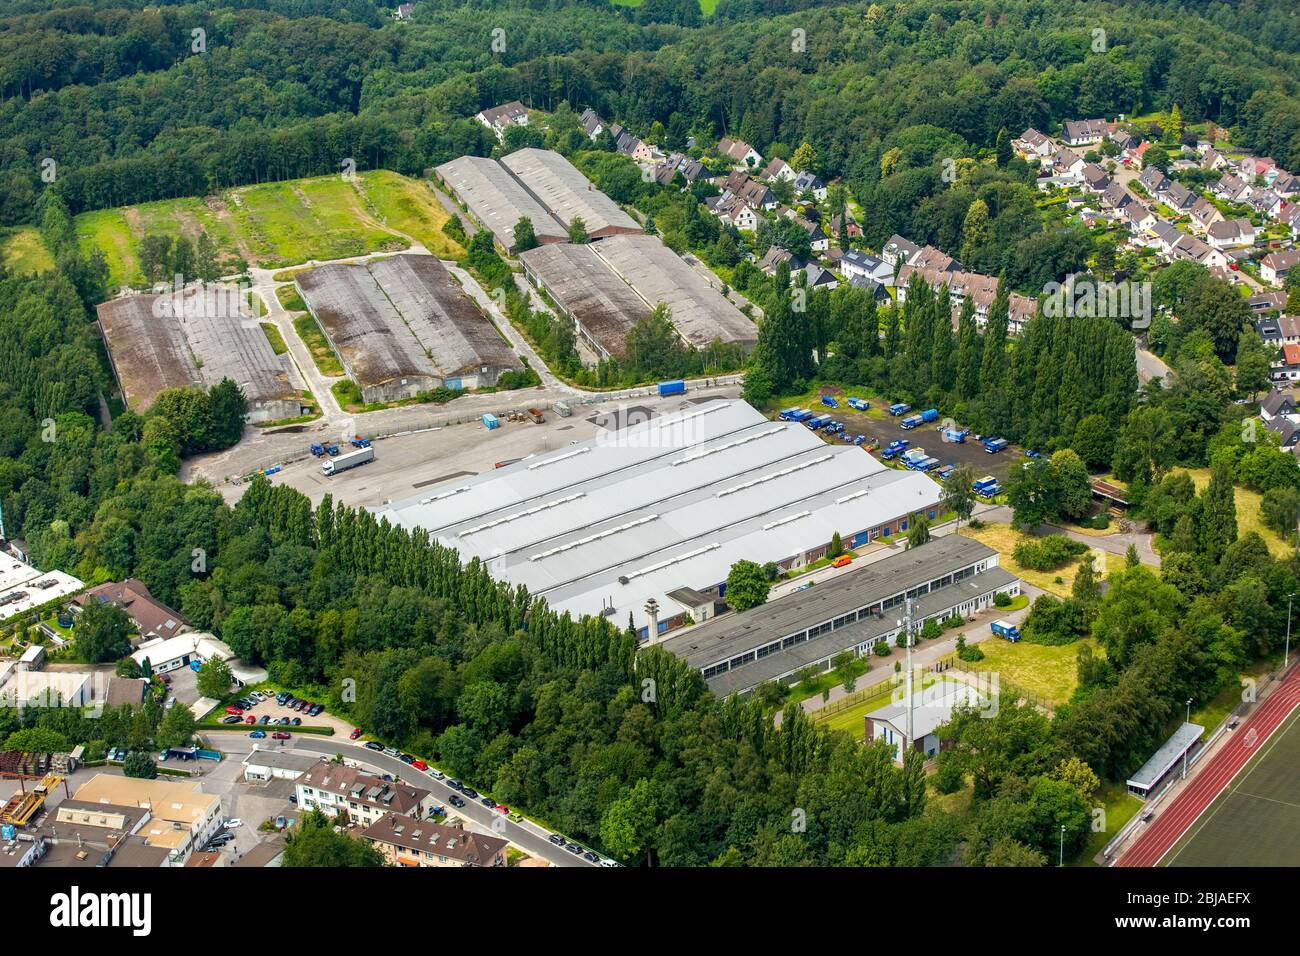 Premises of the Federal Agency for Technical Relief - logistics center Heiligenhaus - with warehouses and company buildings in Heiligenhaus, 07.07.2016, aerial view, Germany, North Rhine-Westphalia, Heiligenhaus Stock Photo